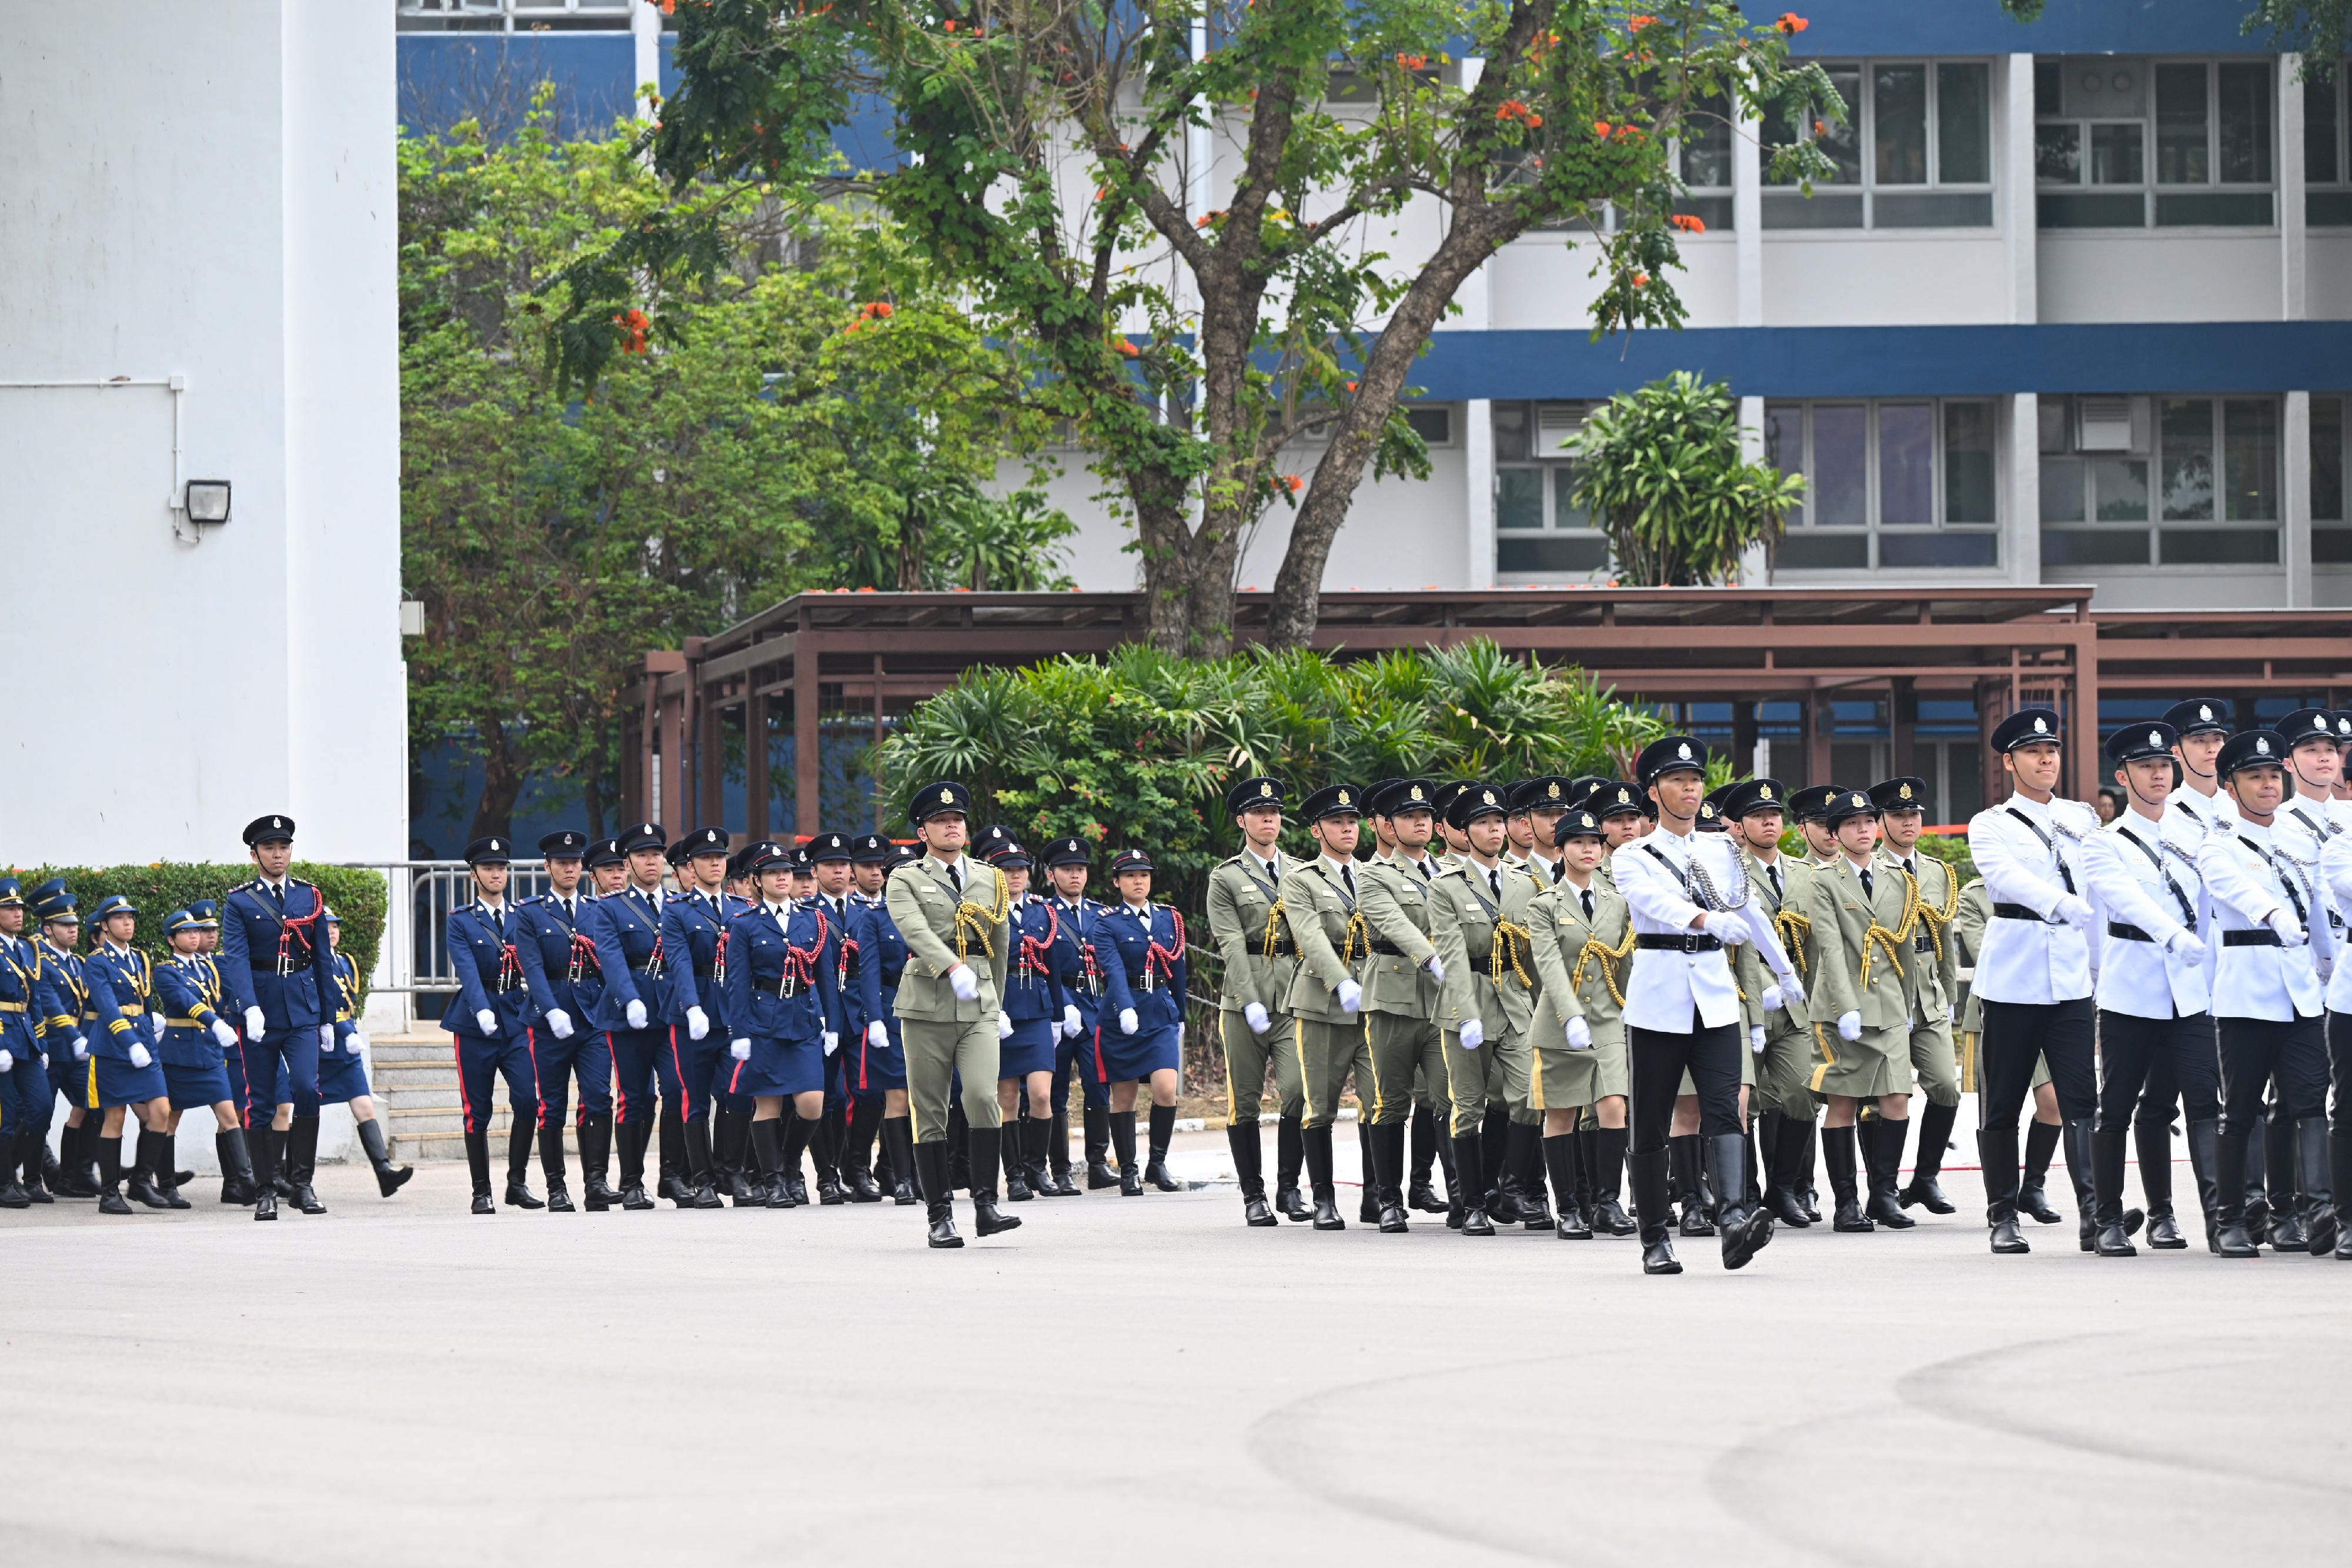 The Security Bureau and its disciplined services jointly held a National Security Education Day flag-raising ceremony at the Hong Kong Police College today (April 15). Photo shows a march-in by the disciplined services ceremonial guard.